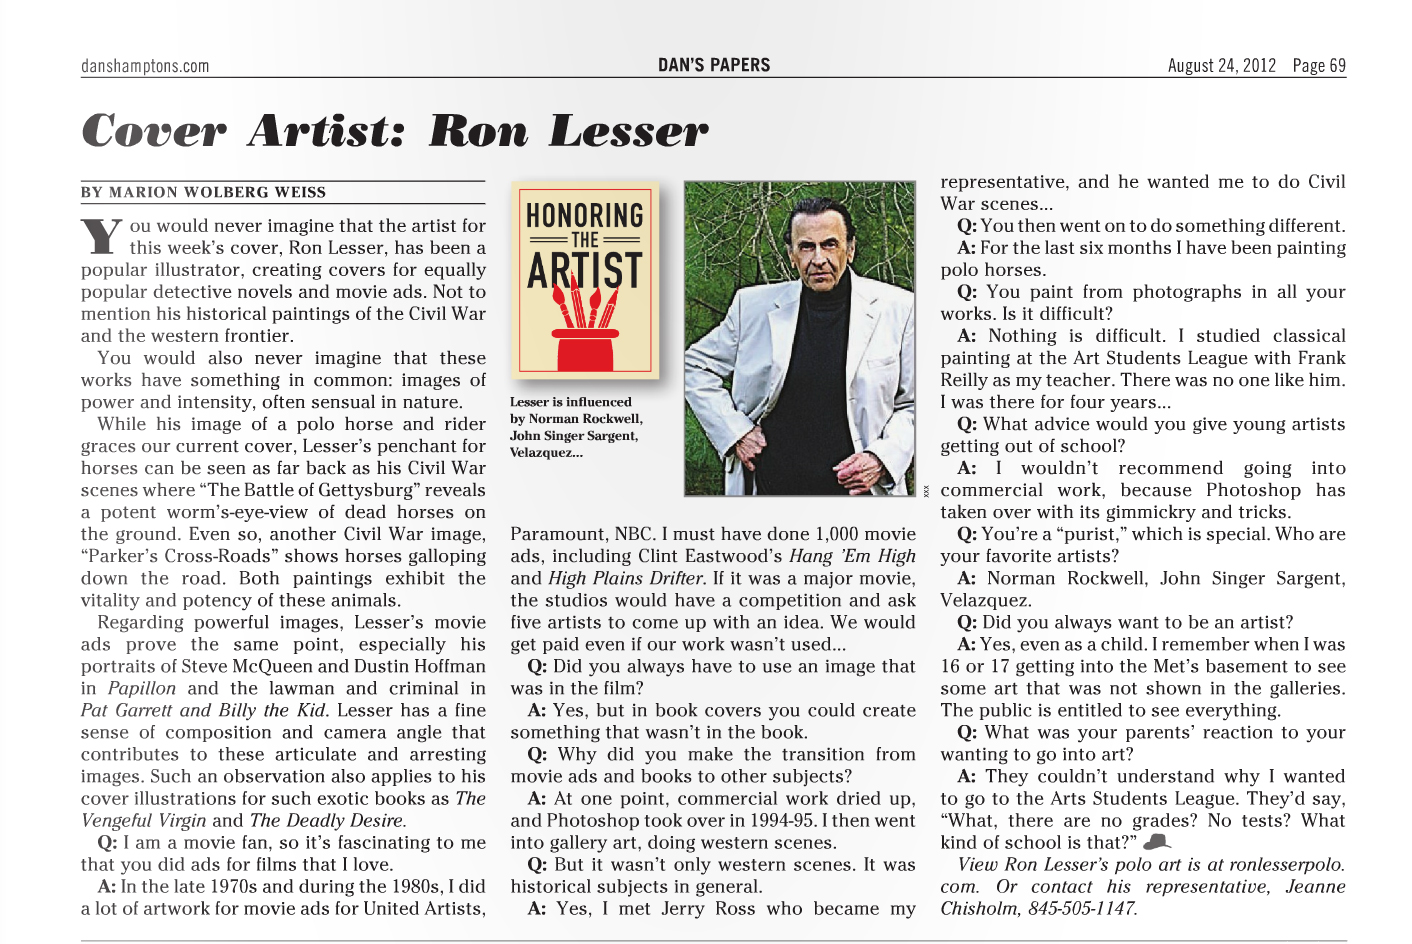 Dan's Papers Interview with Rone Lesser - August 2012